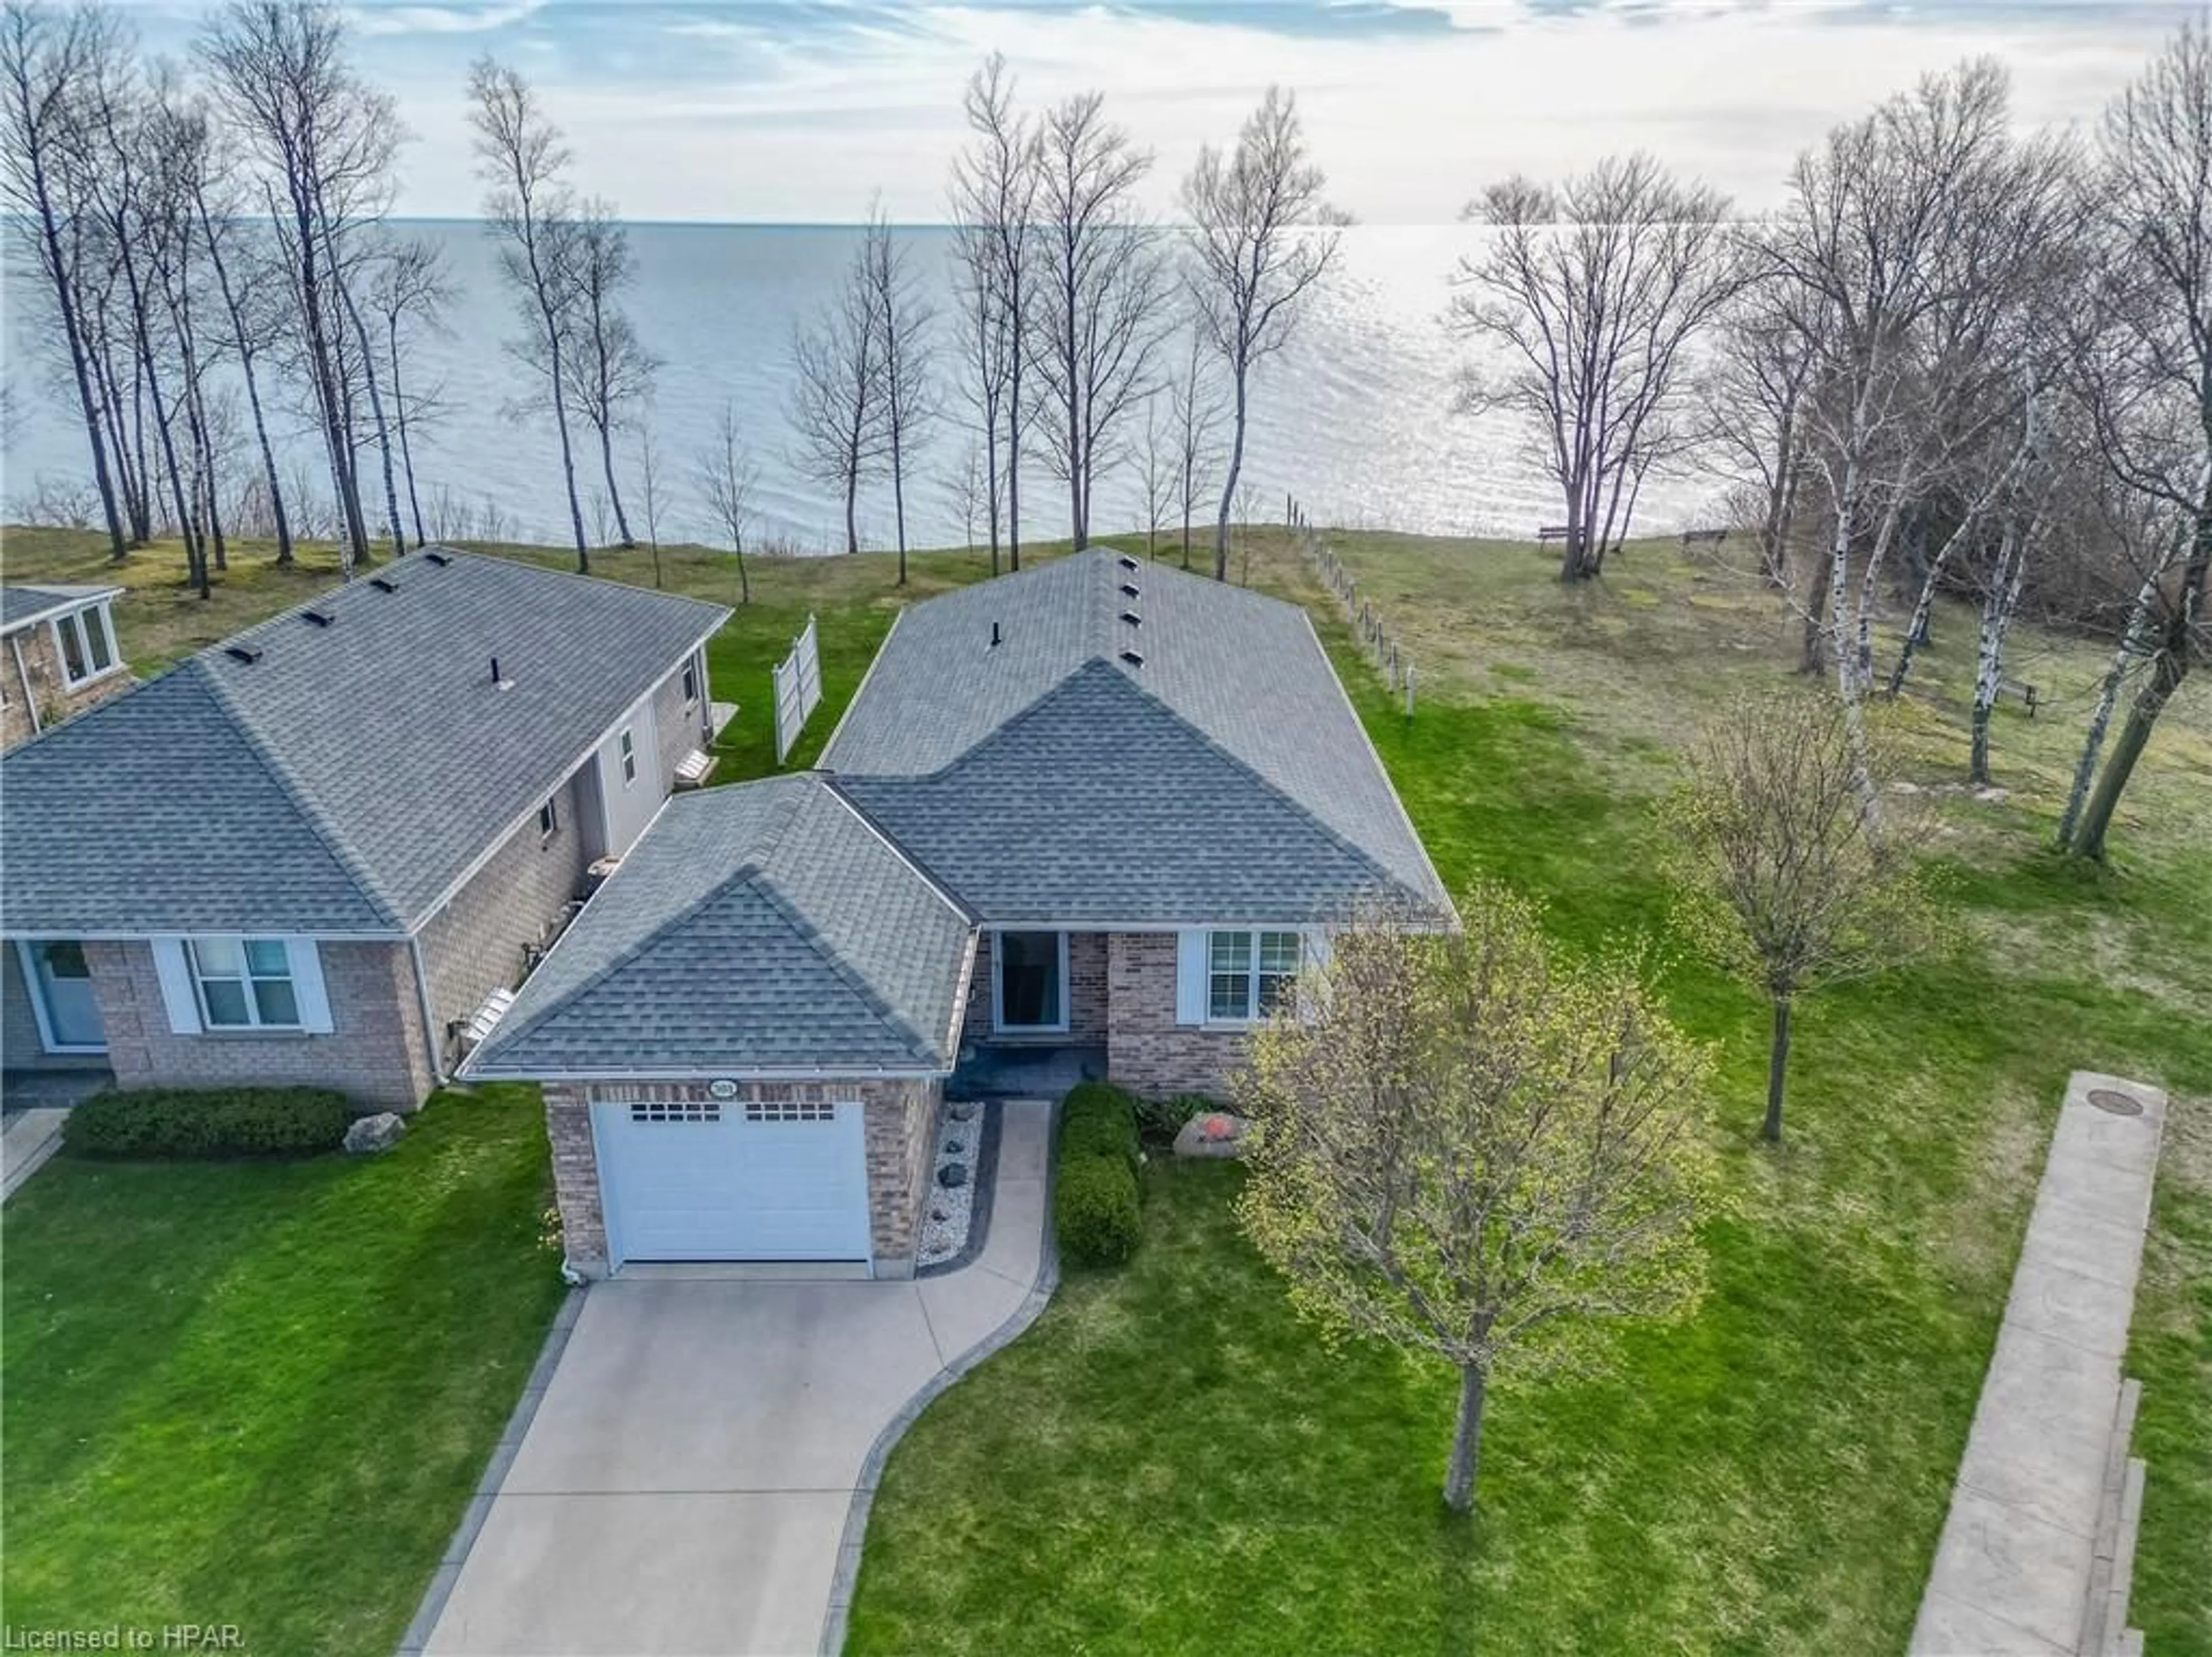 Lakeview for 301 Bethune Cres, Goderich Ontario N7A 4M6